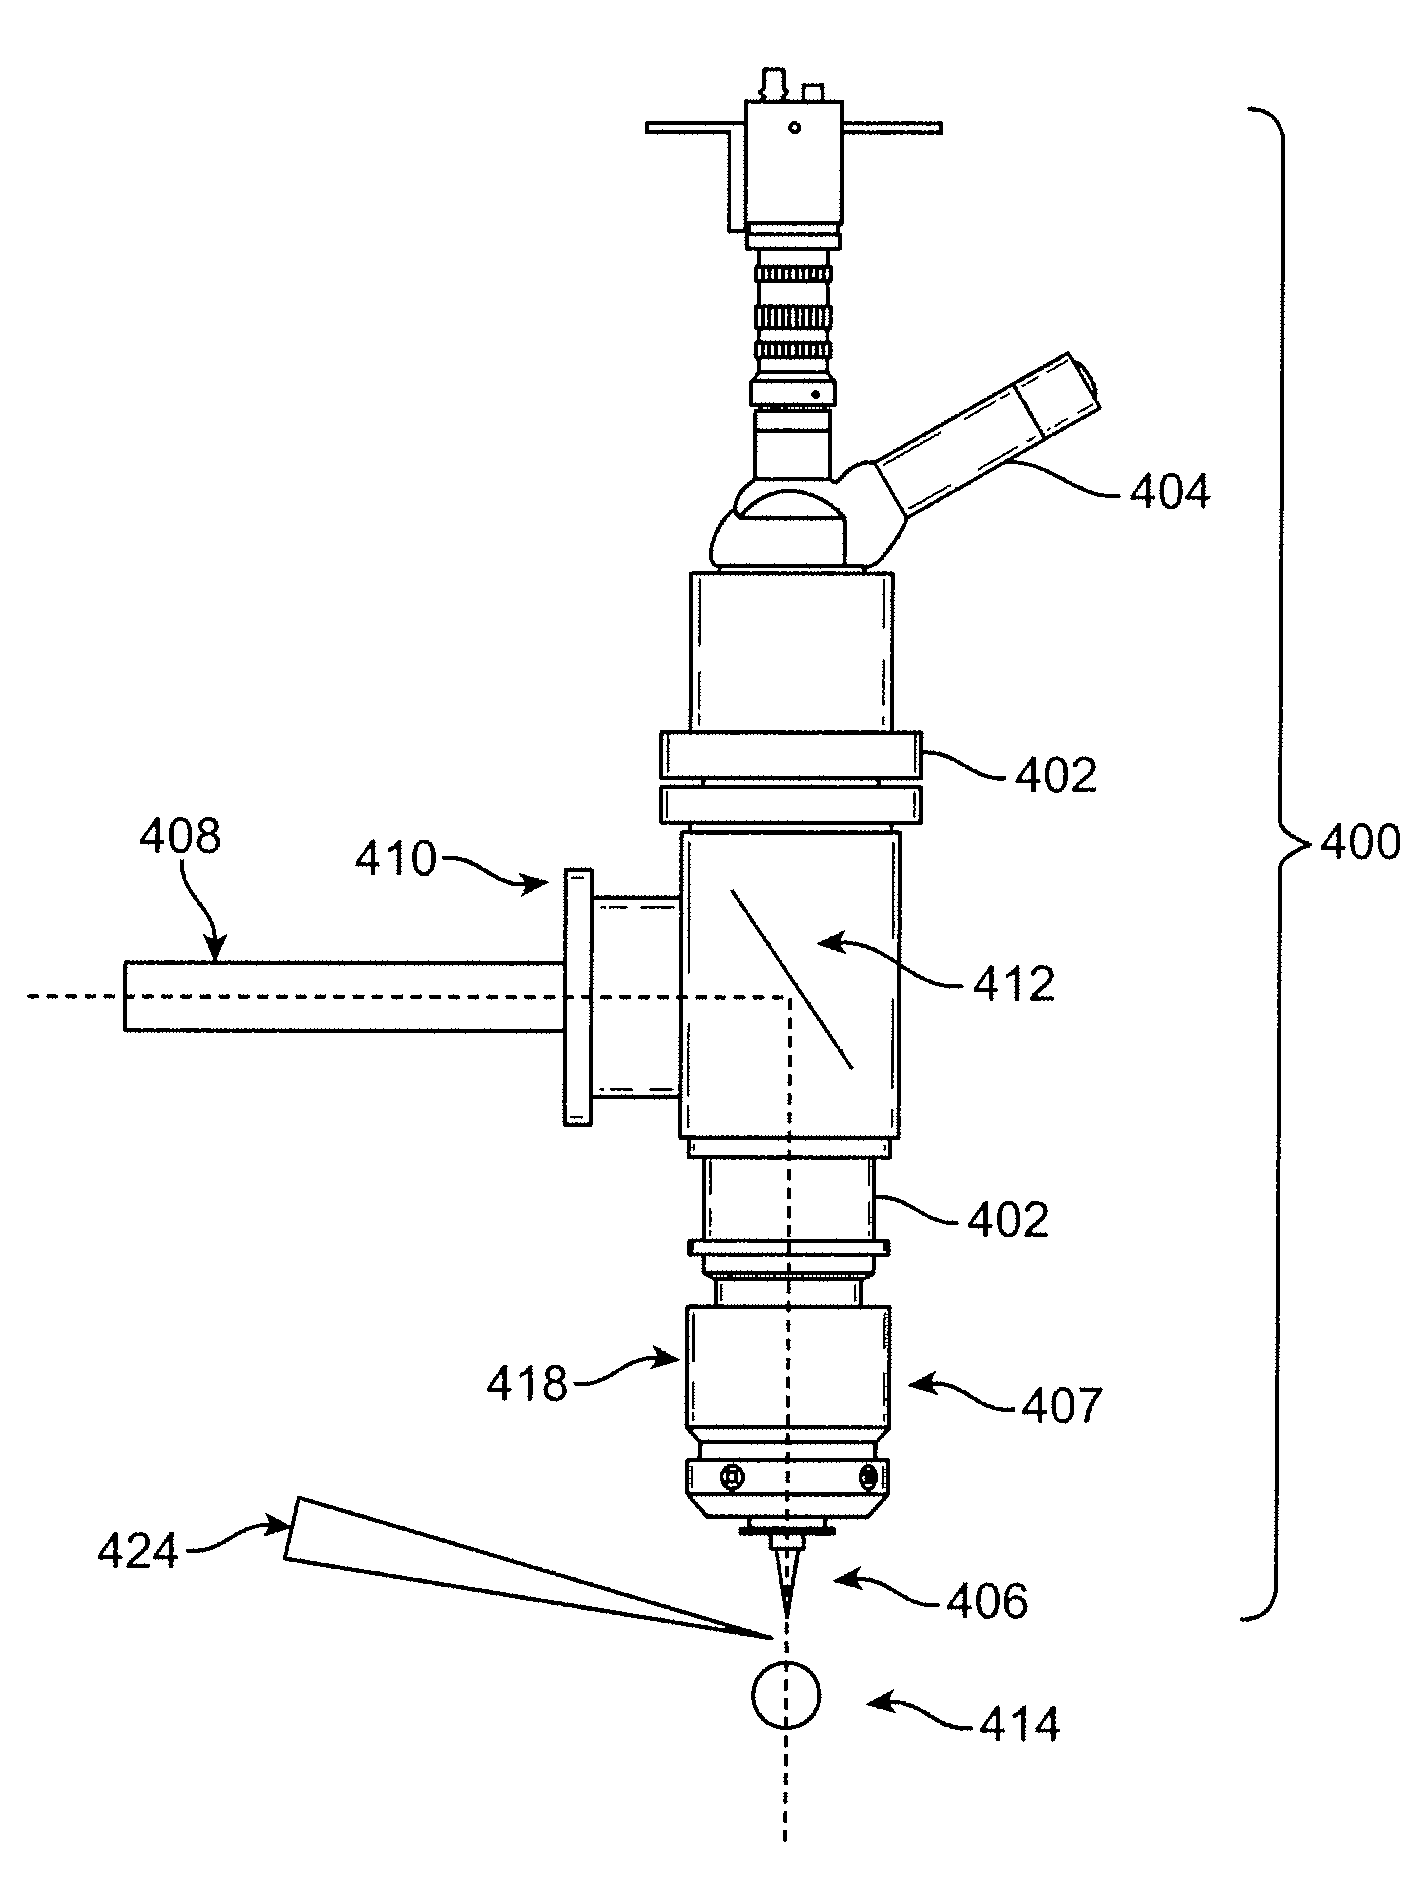 Laser Machining Medical Devices With Localized Cooling